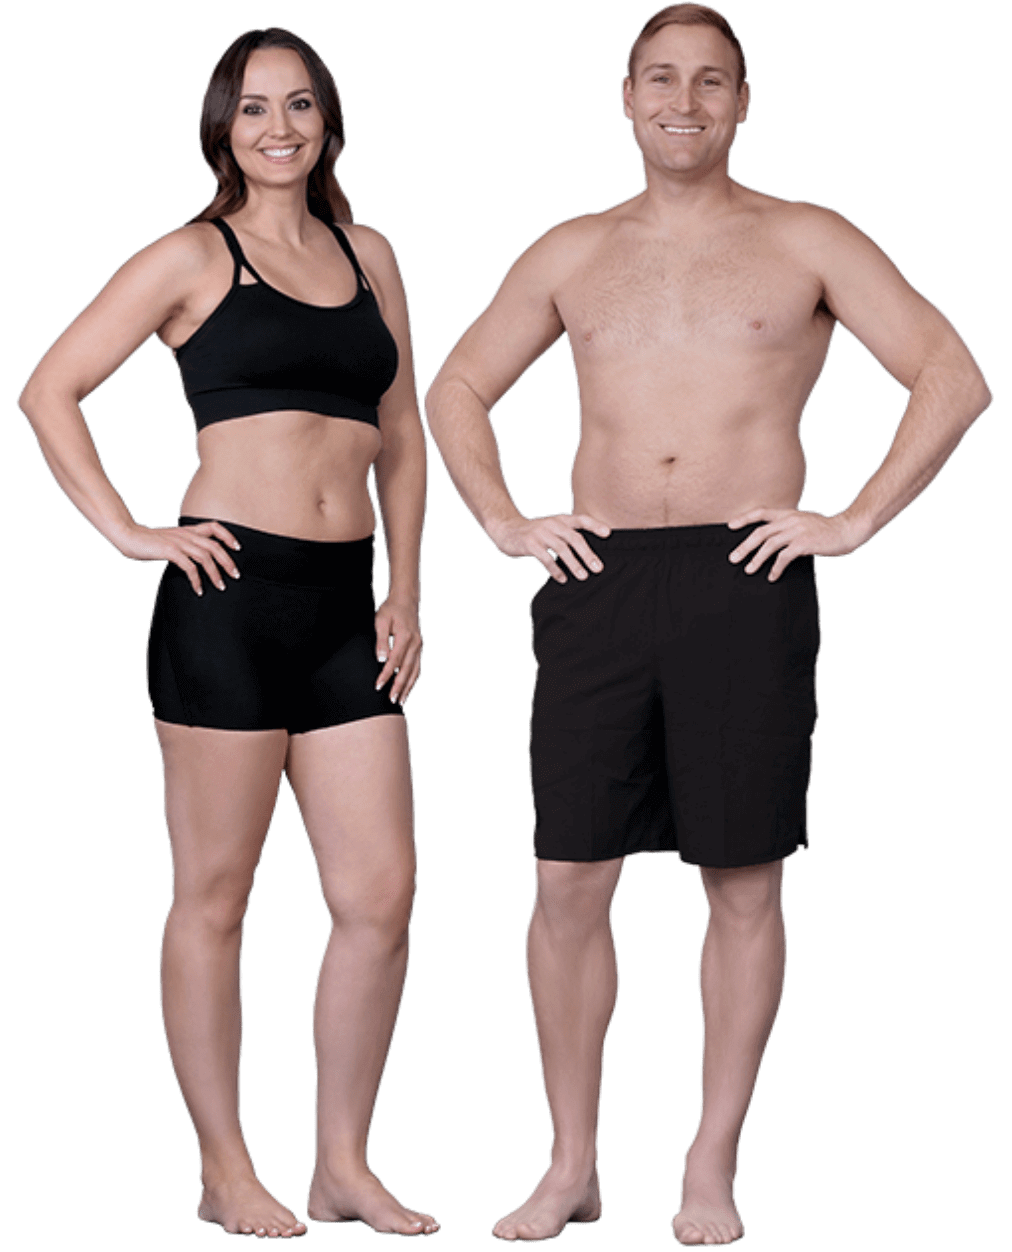 Reshape your body with CoolSculpting